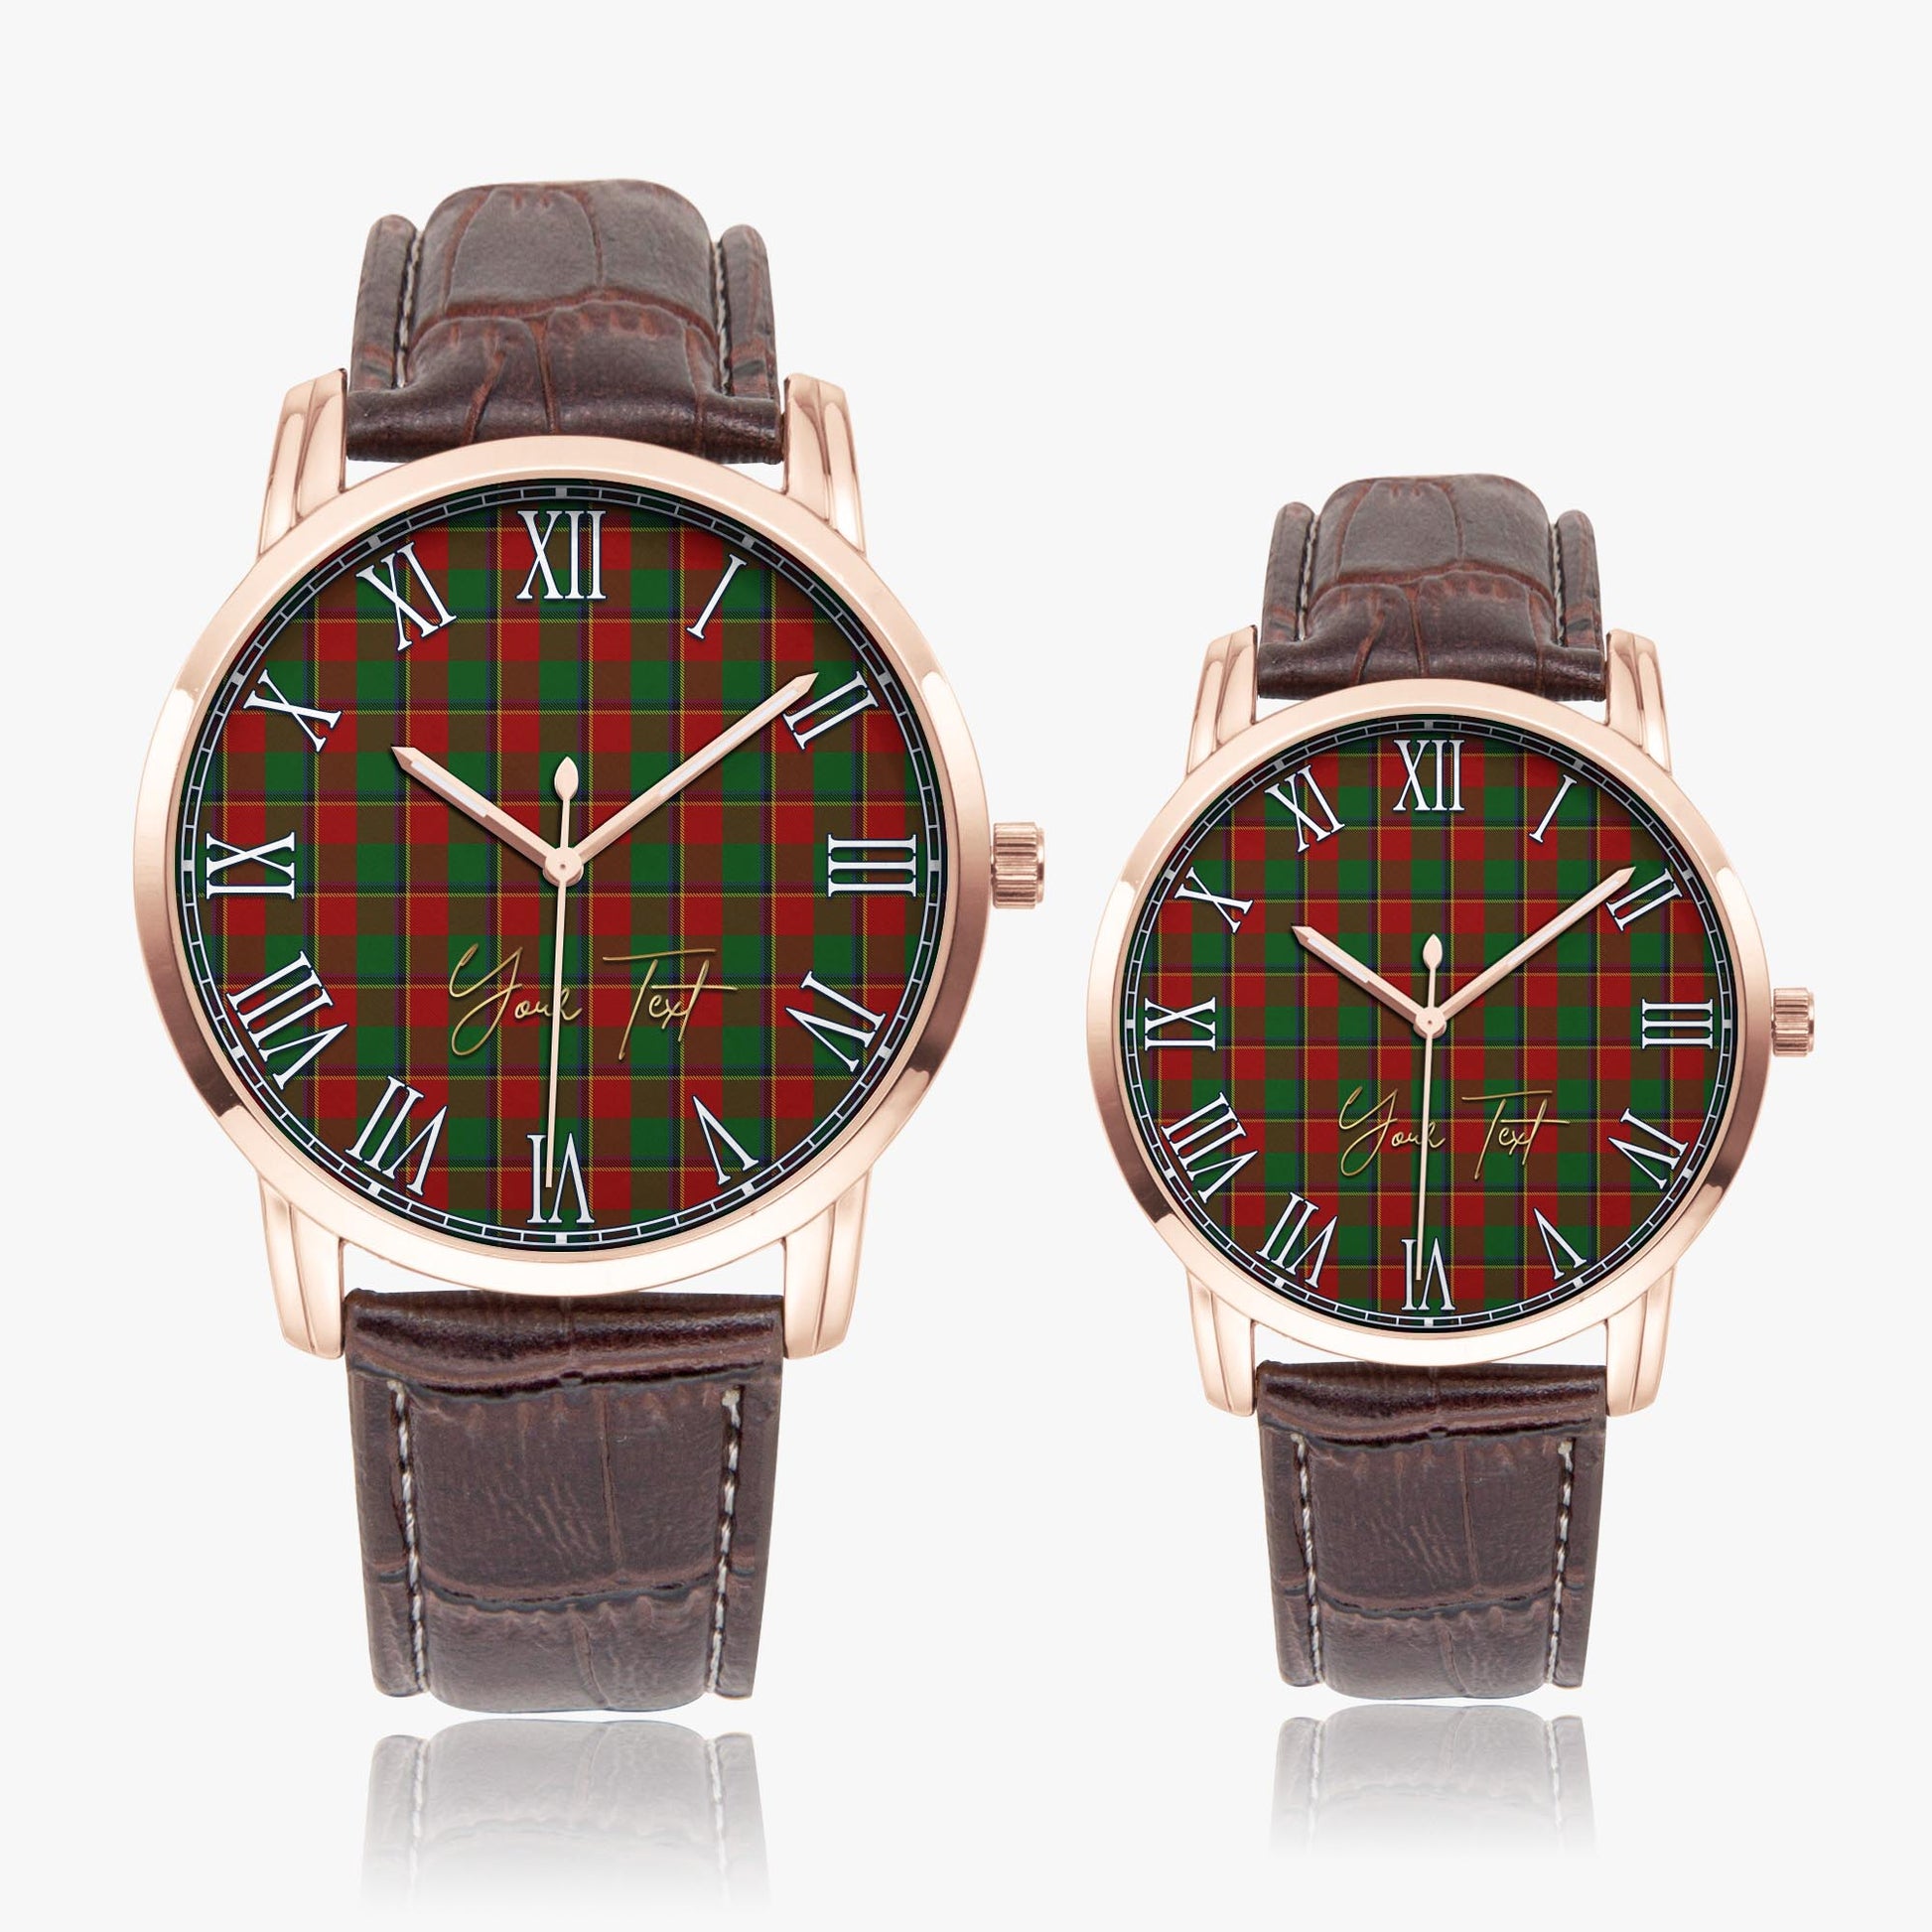 Turnbull Dress Tartan Personalized Your Text Leather Trap Quartz Watch Wide Type Rose Gold Case With Brown Leather Strap - Tartanvibesclothing Shop